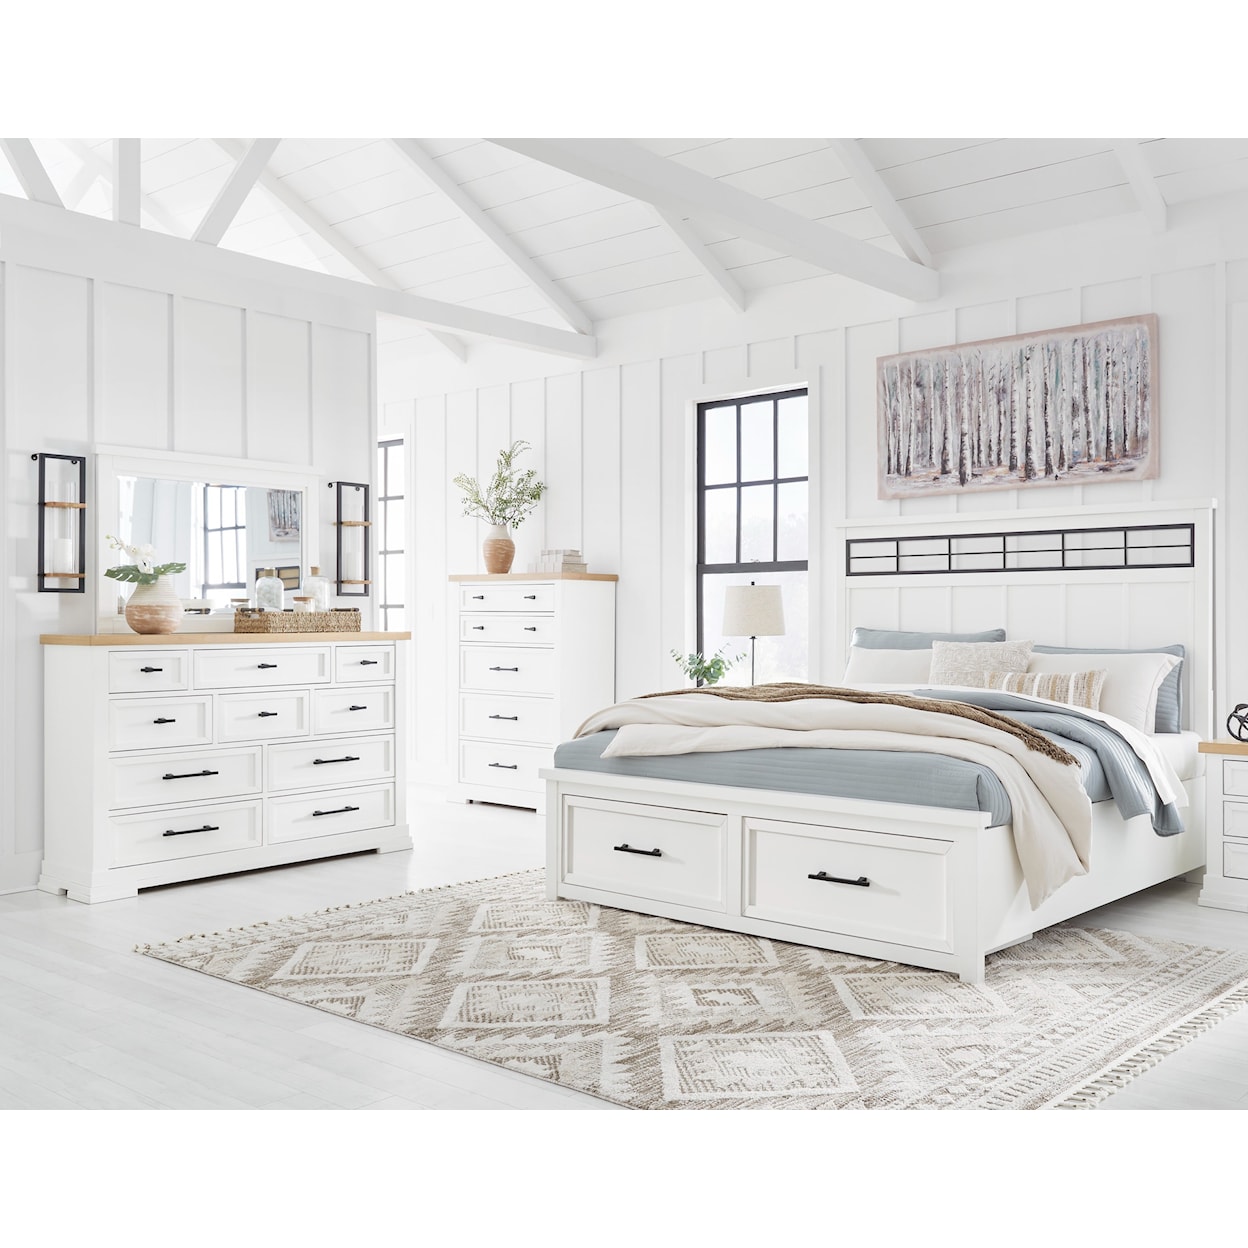 Benchcraft by Ashley Ashbryn Queen Bedroom Group